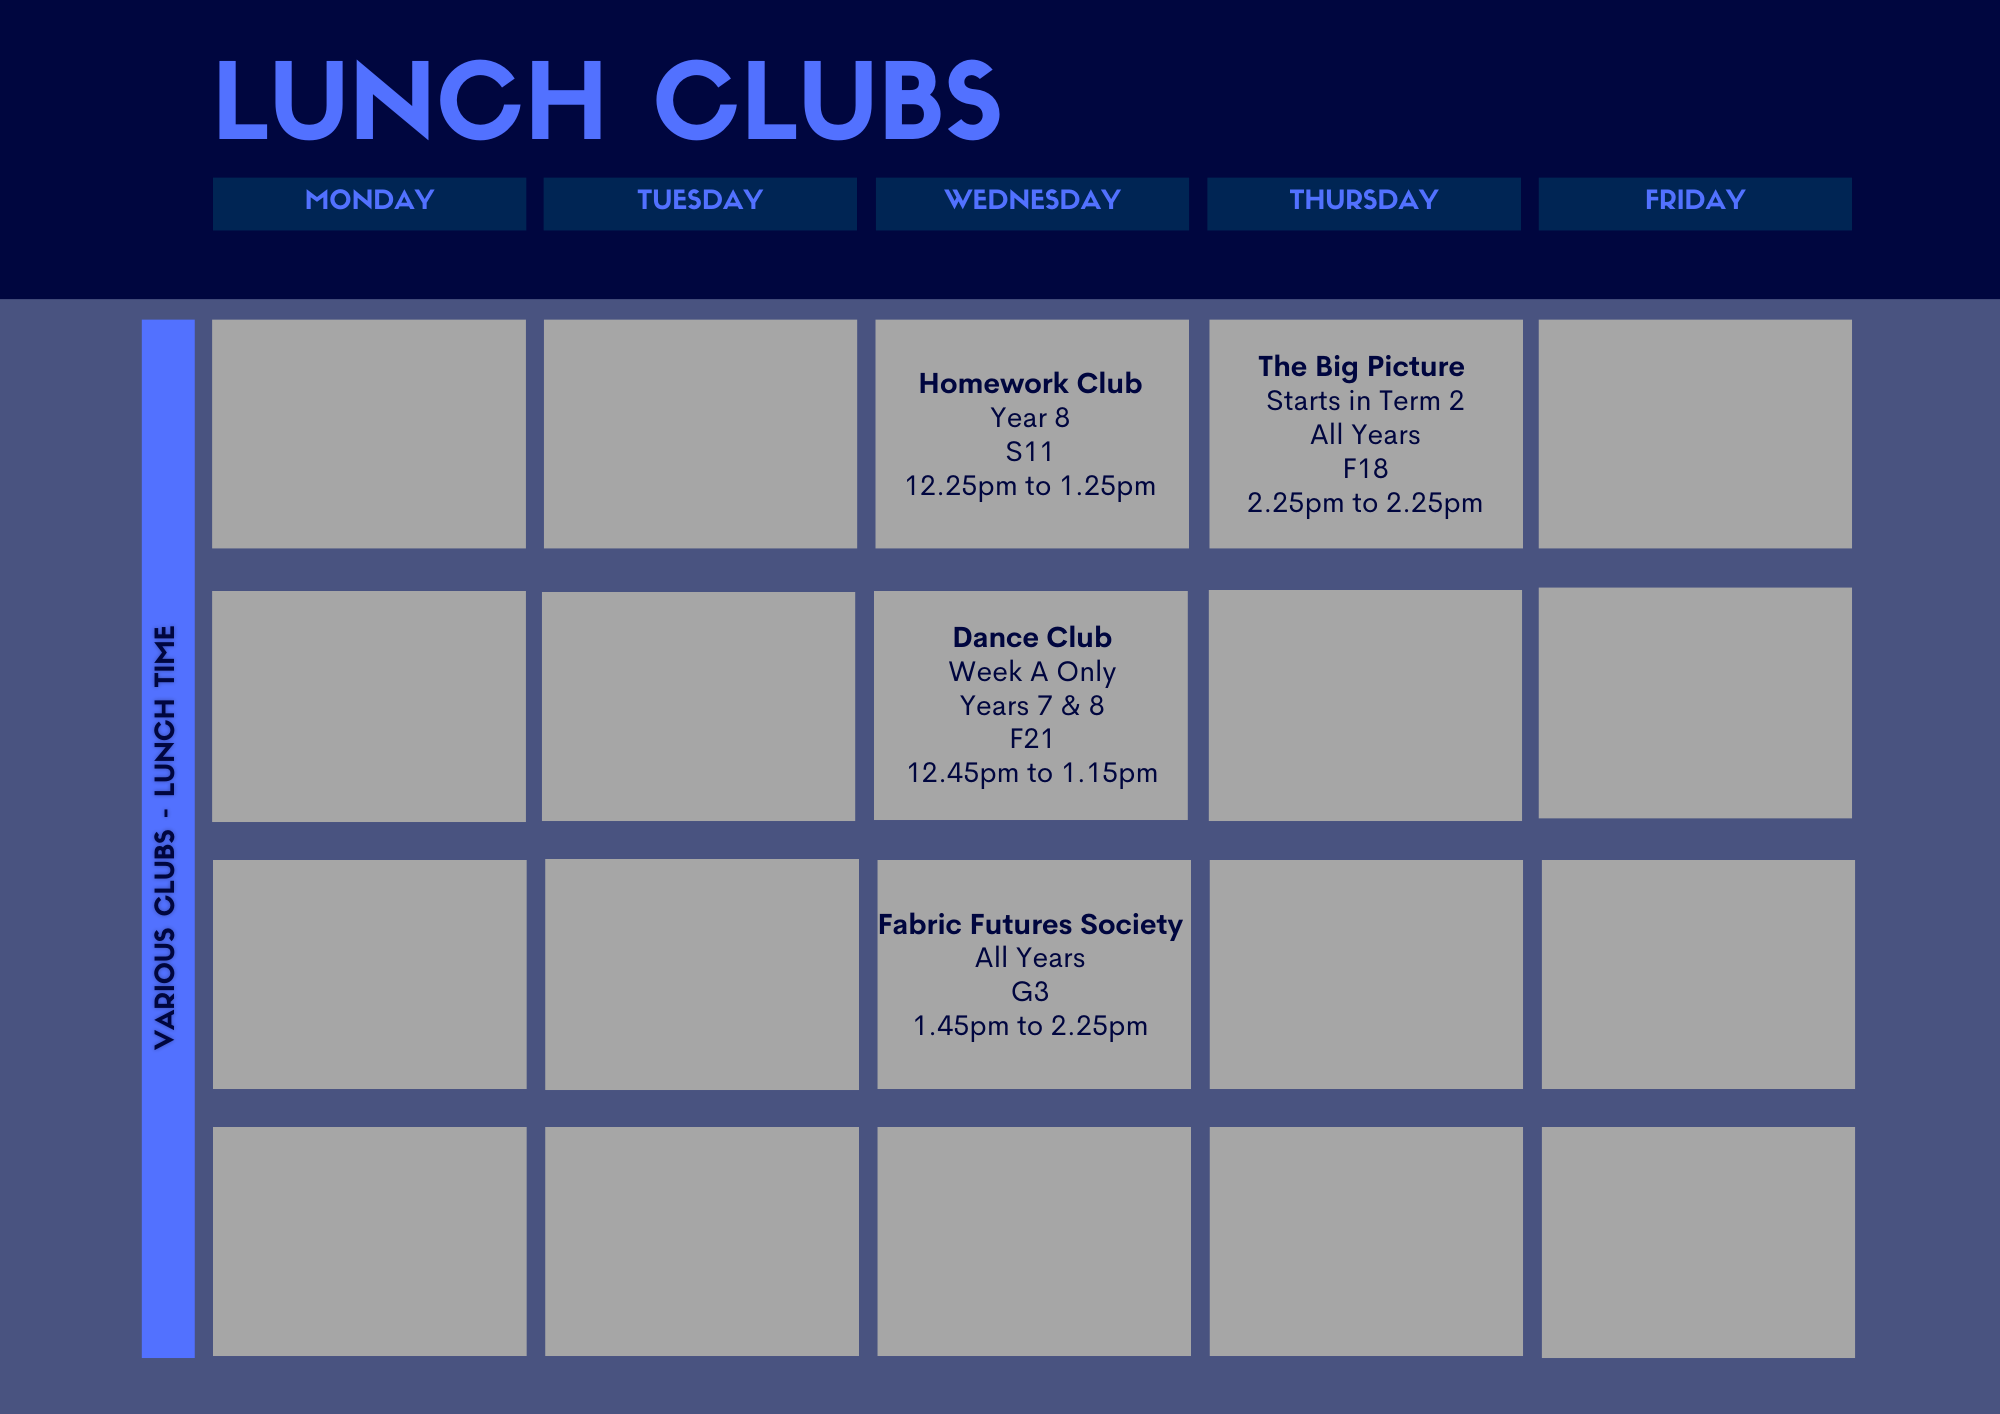 Lunch club 2 School Clubs and Societies (4)